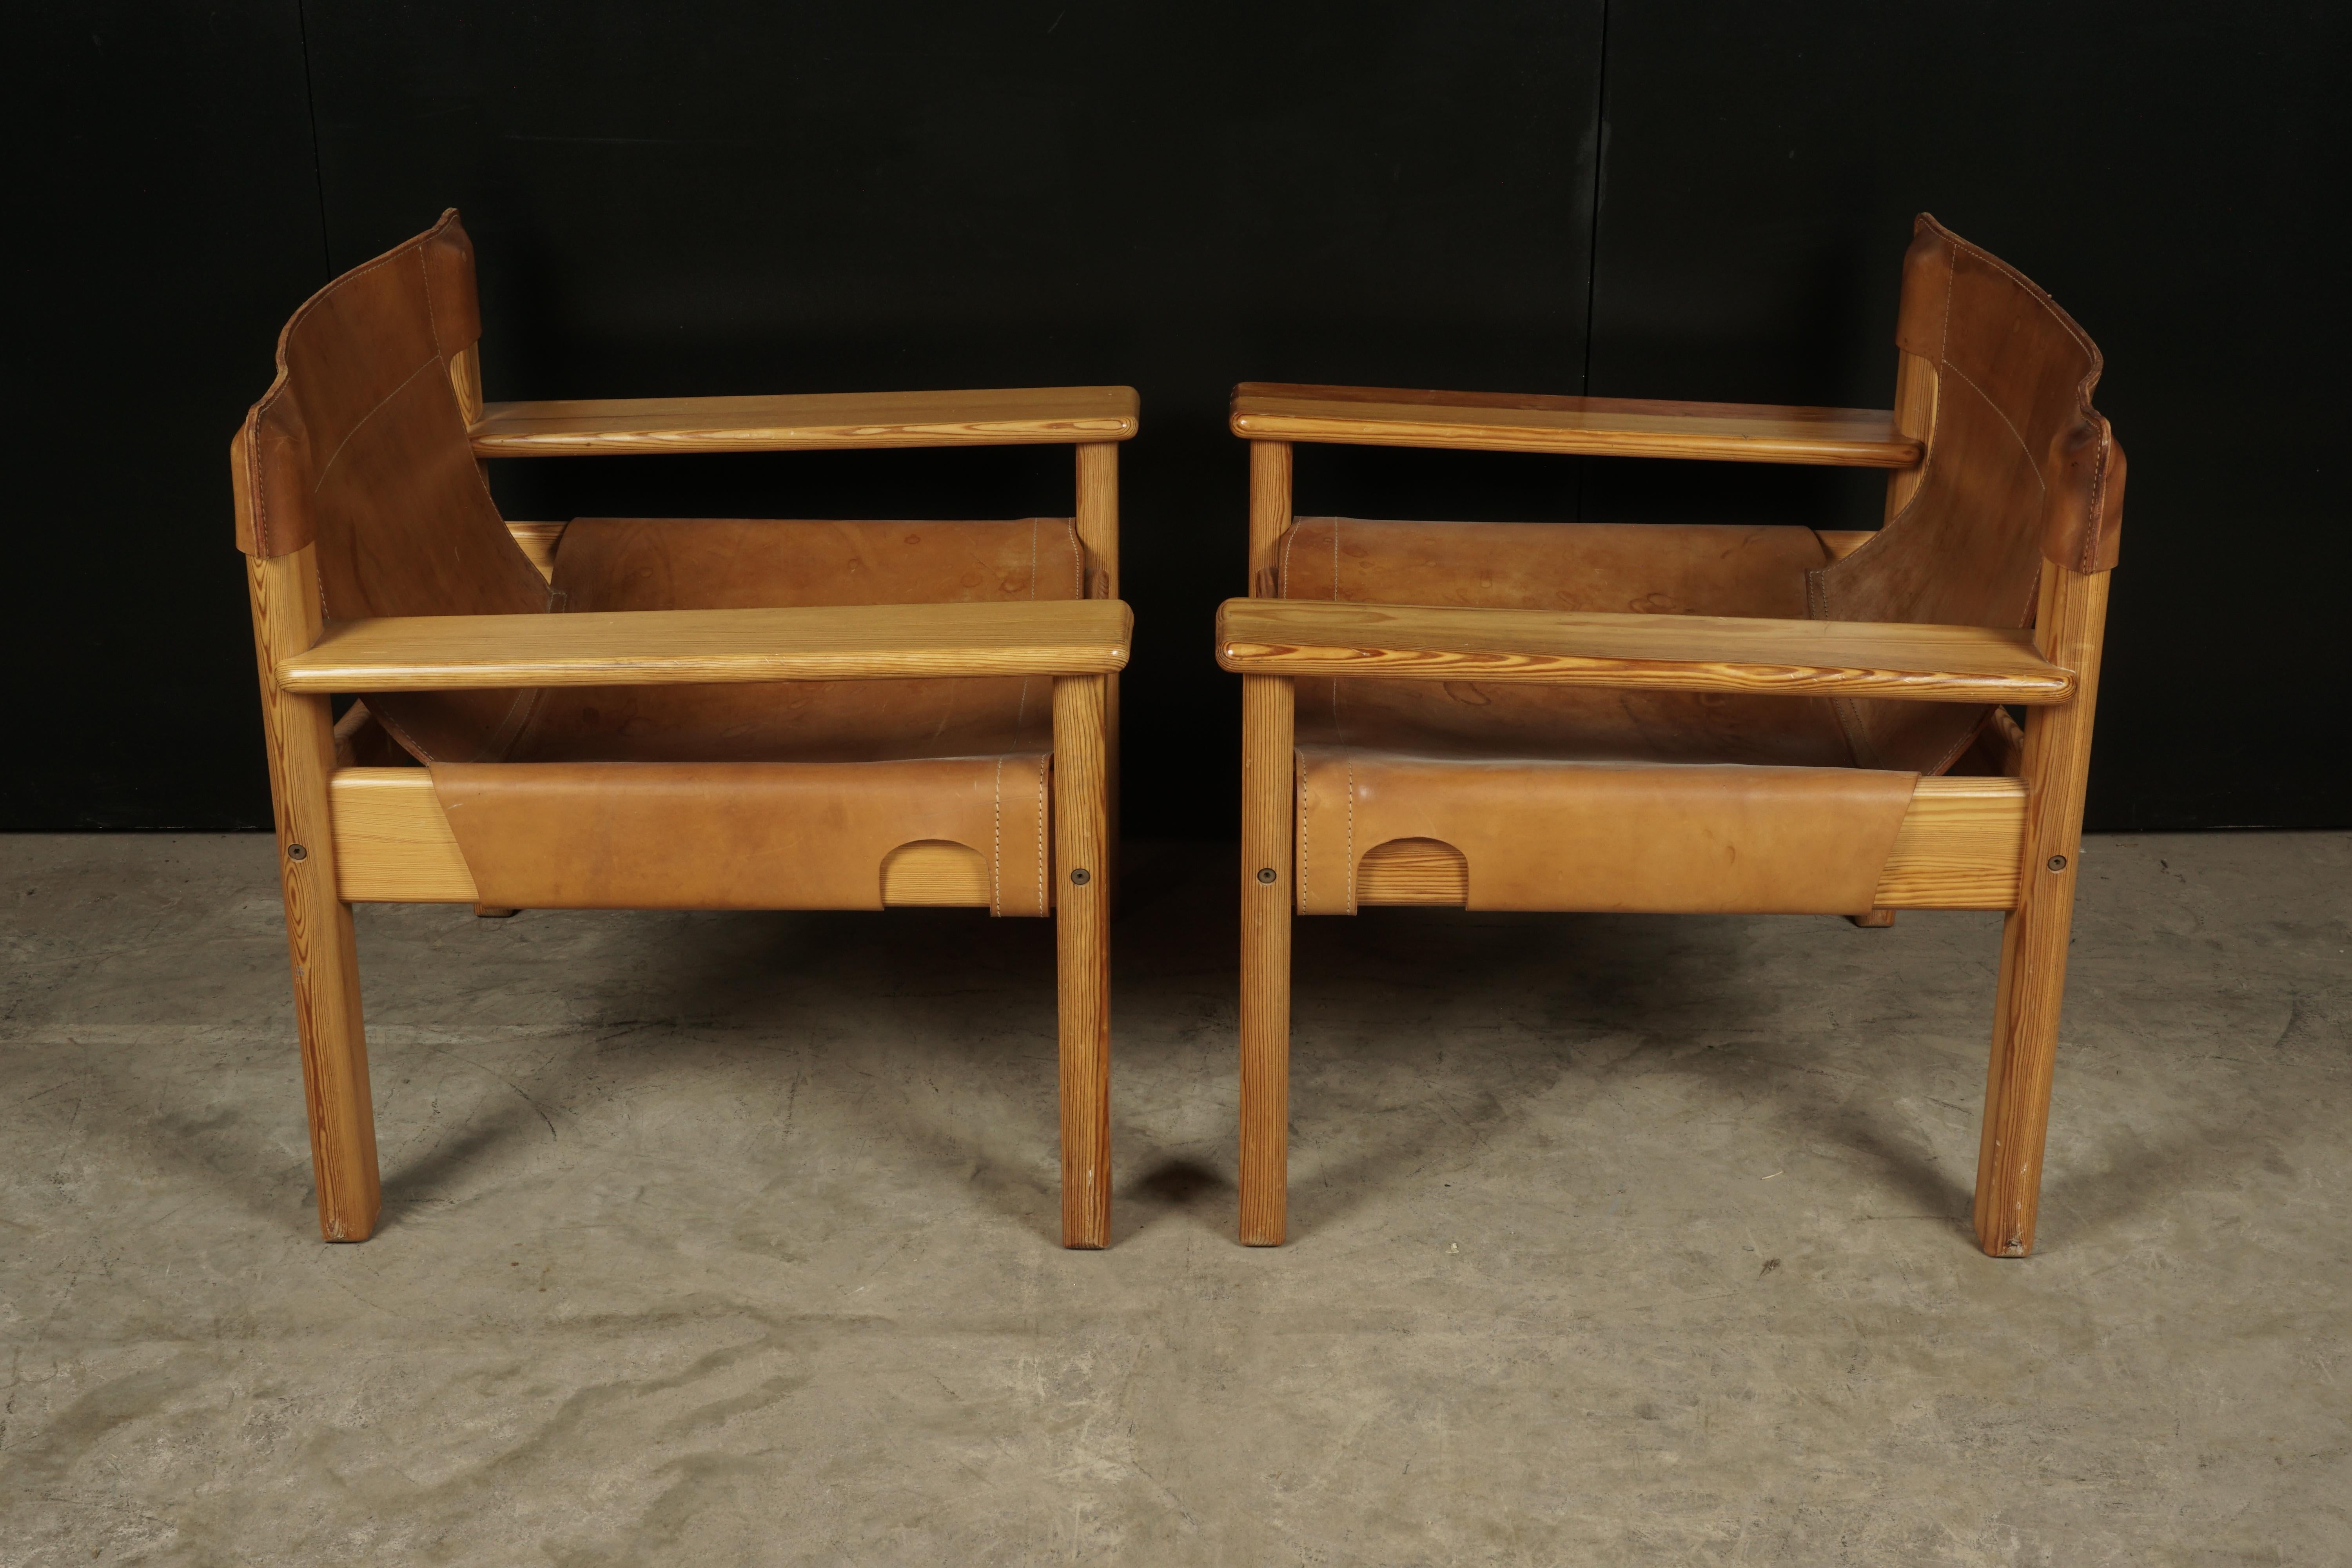 European Midcentury Pair of Spanish Style Chairs from Sweden, circa 1970